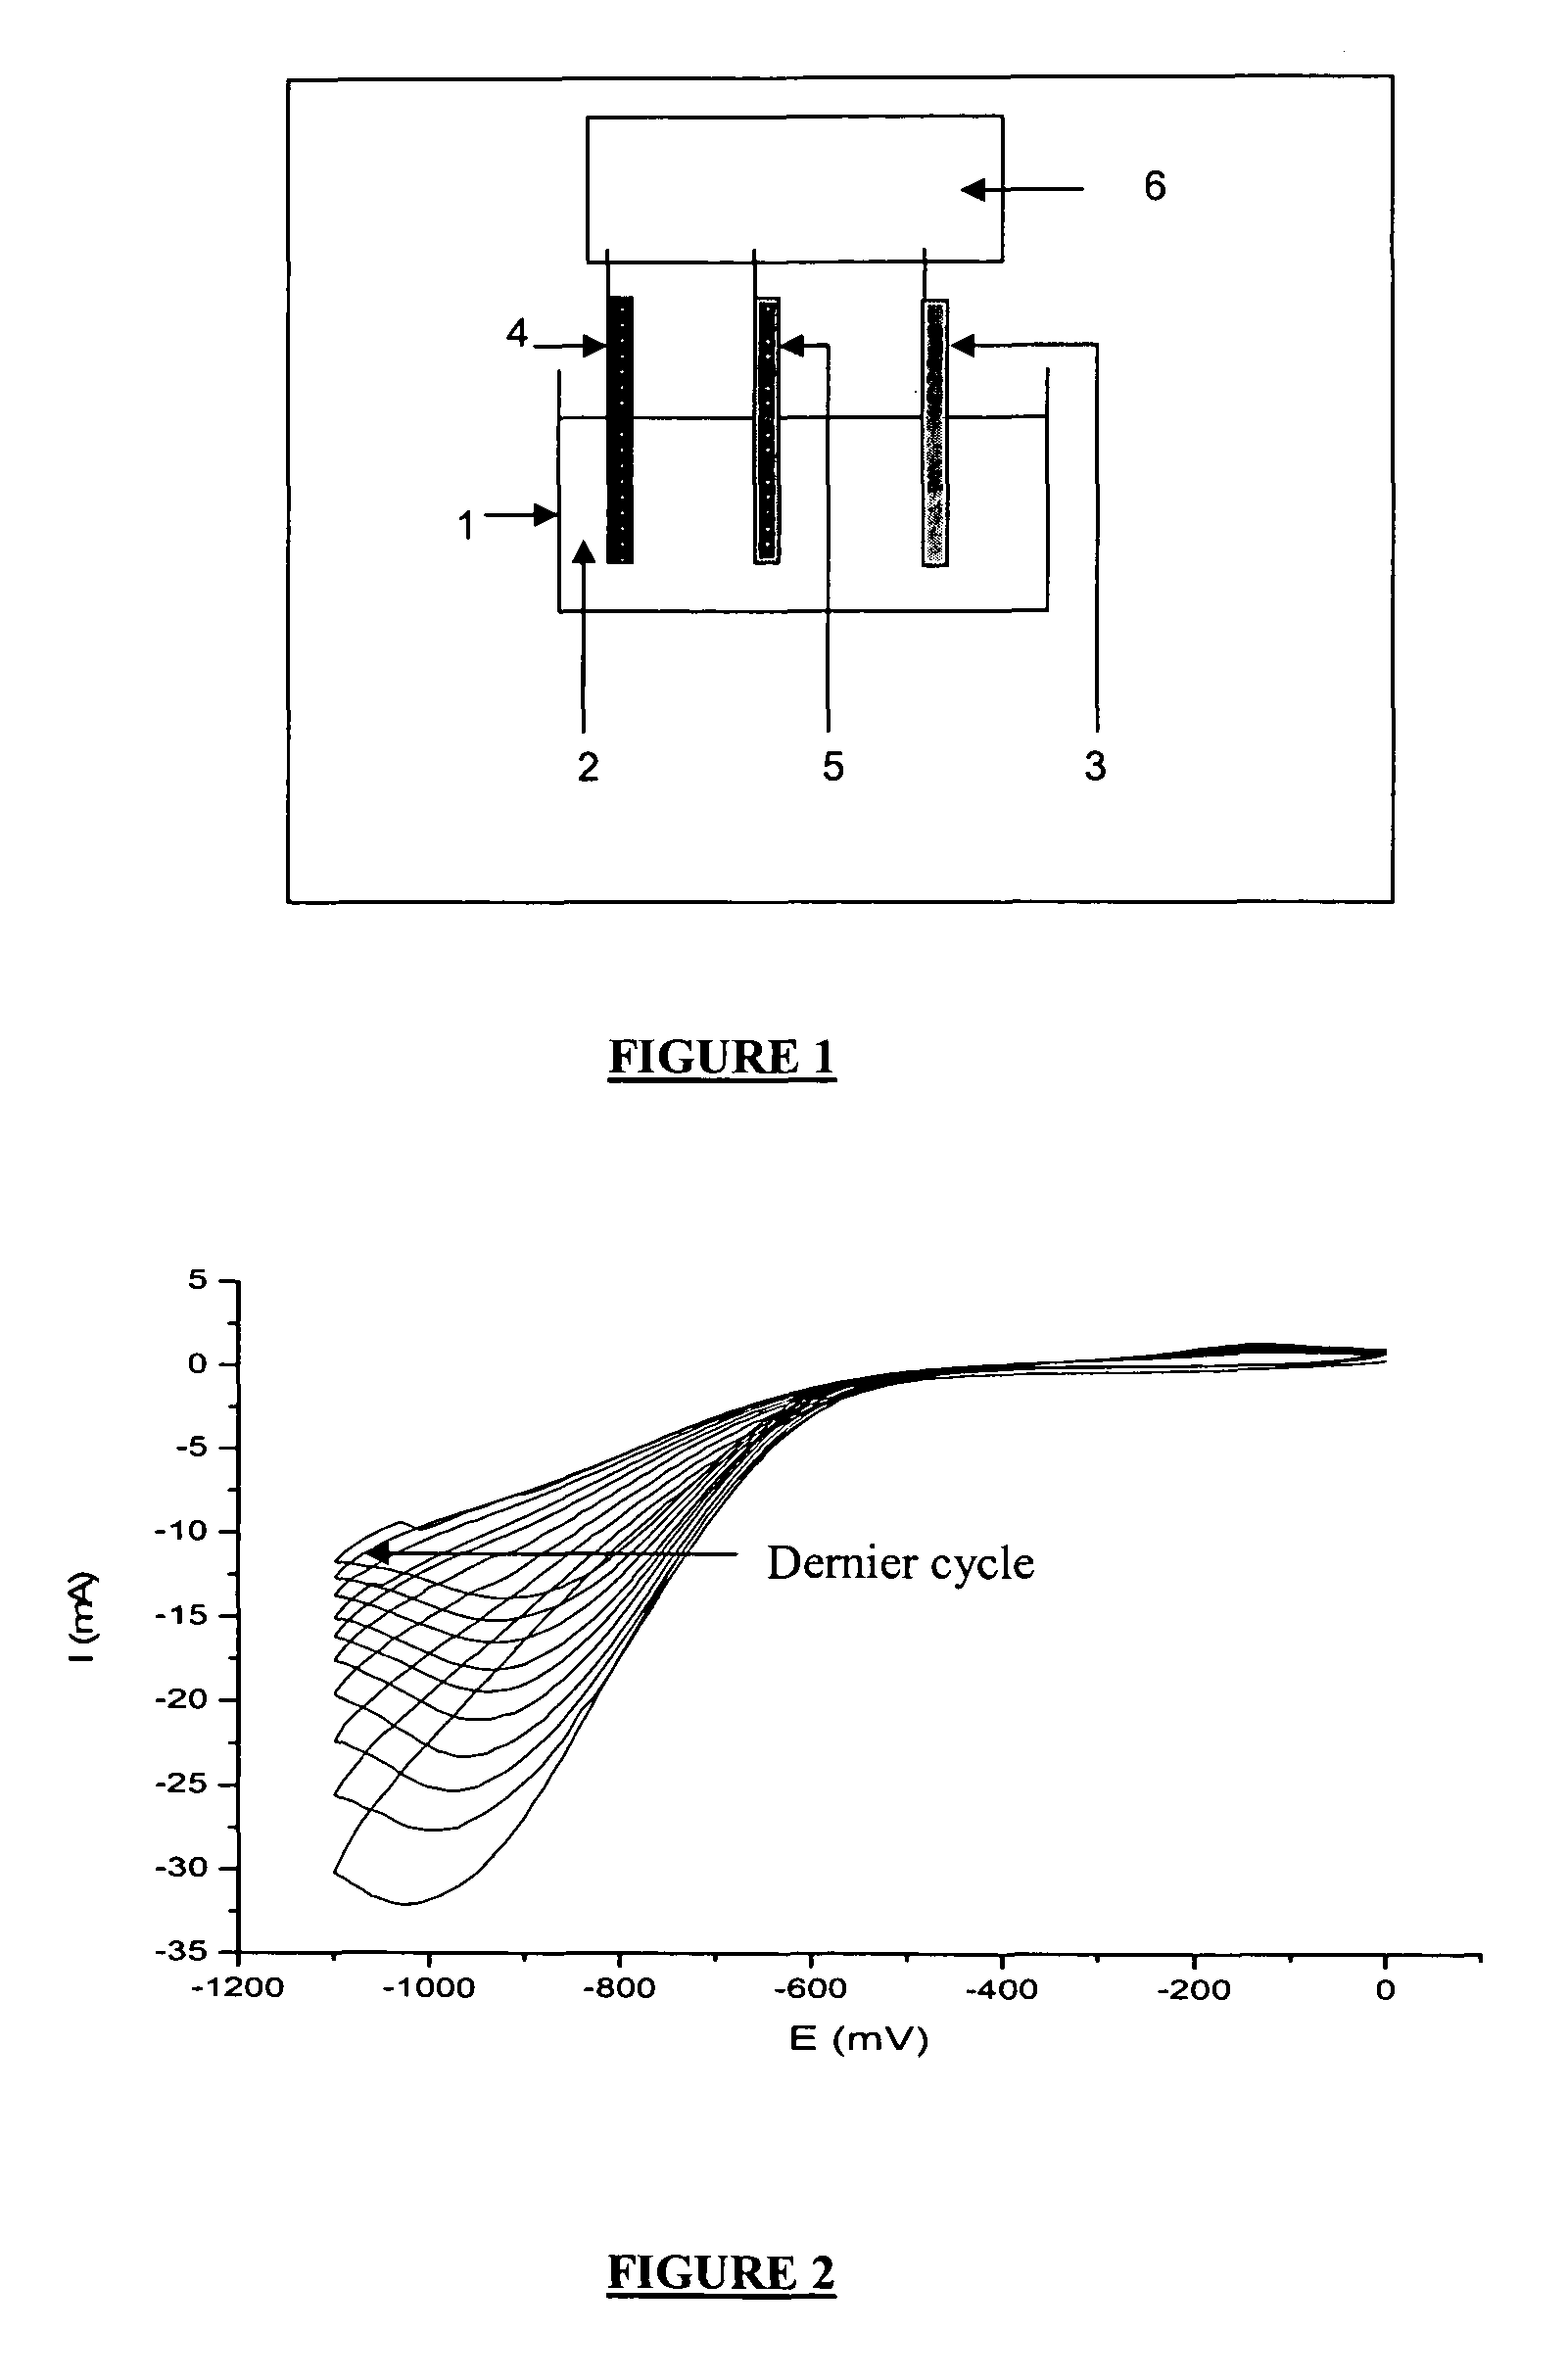 Process for forming organic films on electrically conductive or semi-conductive surfaces using aqueous solutions